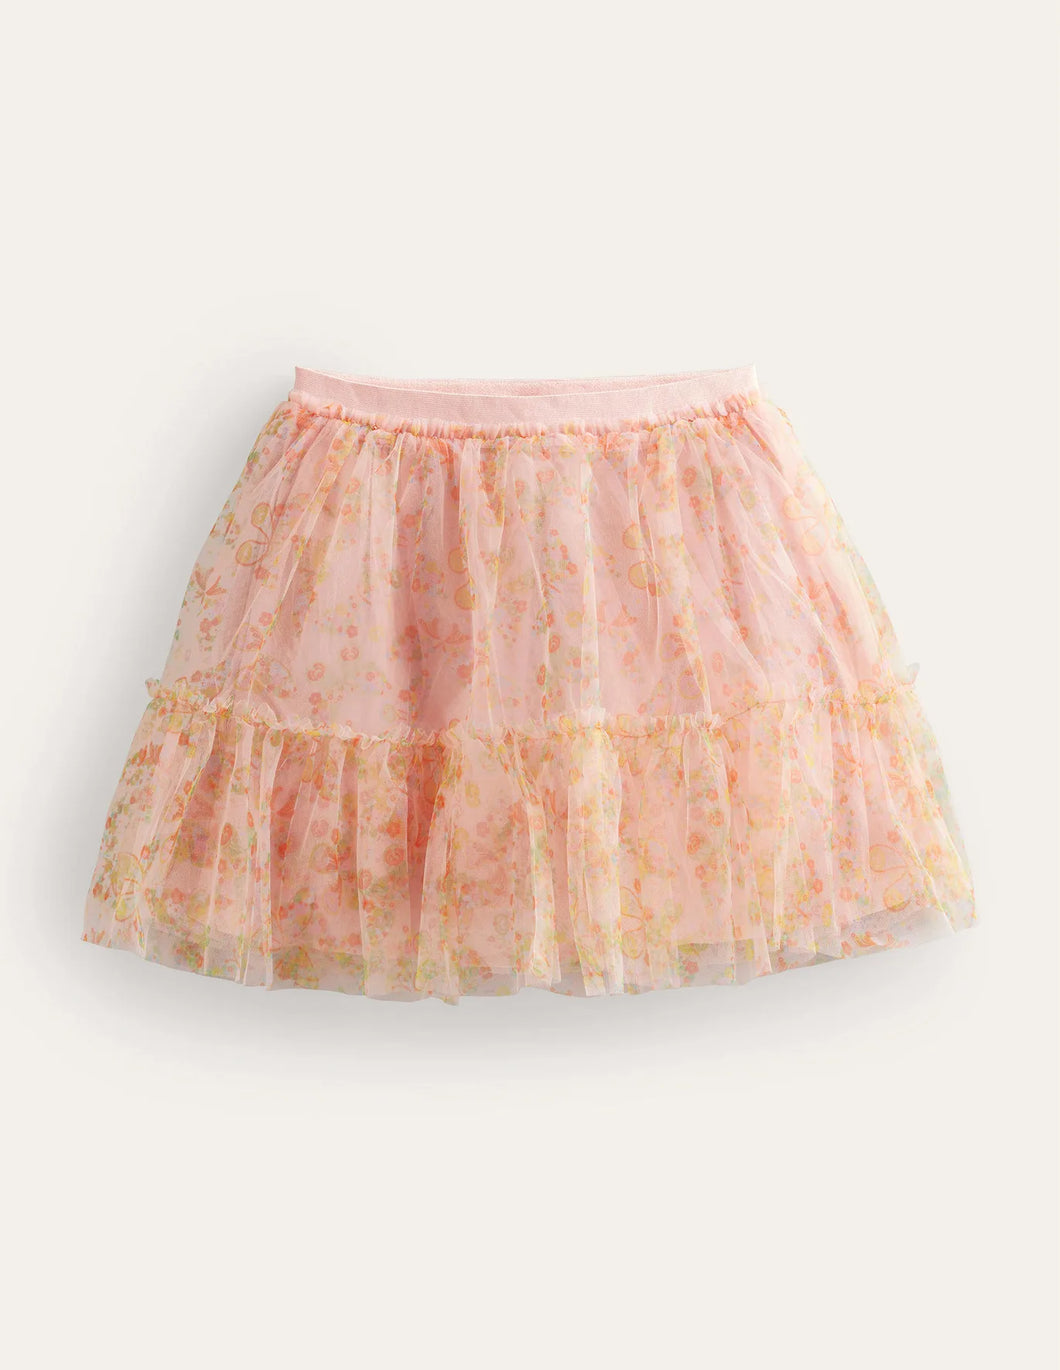 NWT Mini Boden Printed Tiered Tulle Skirt